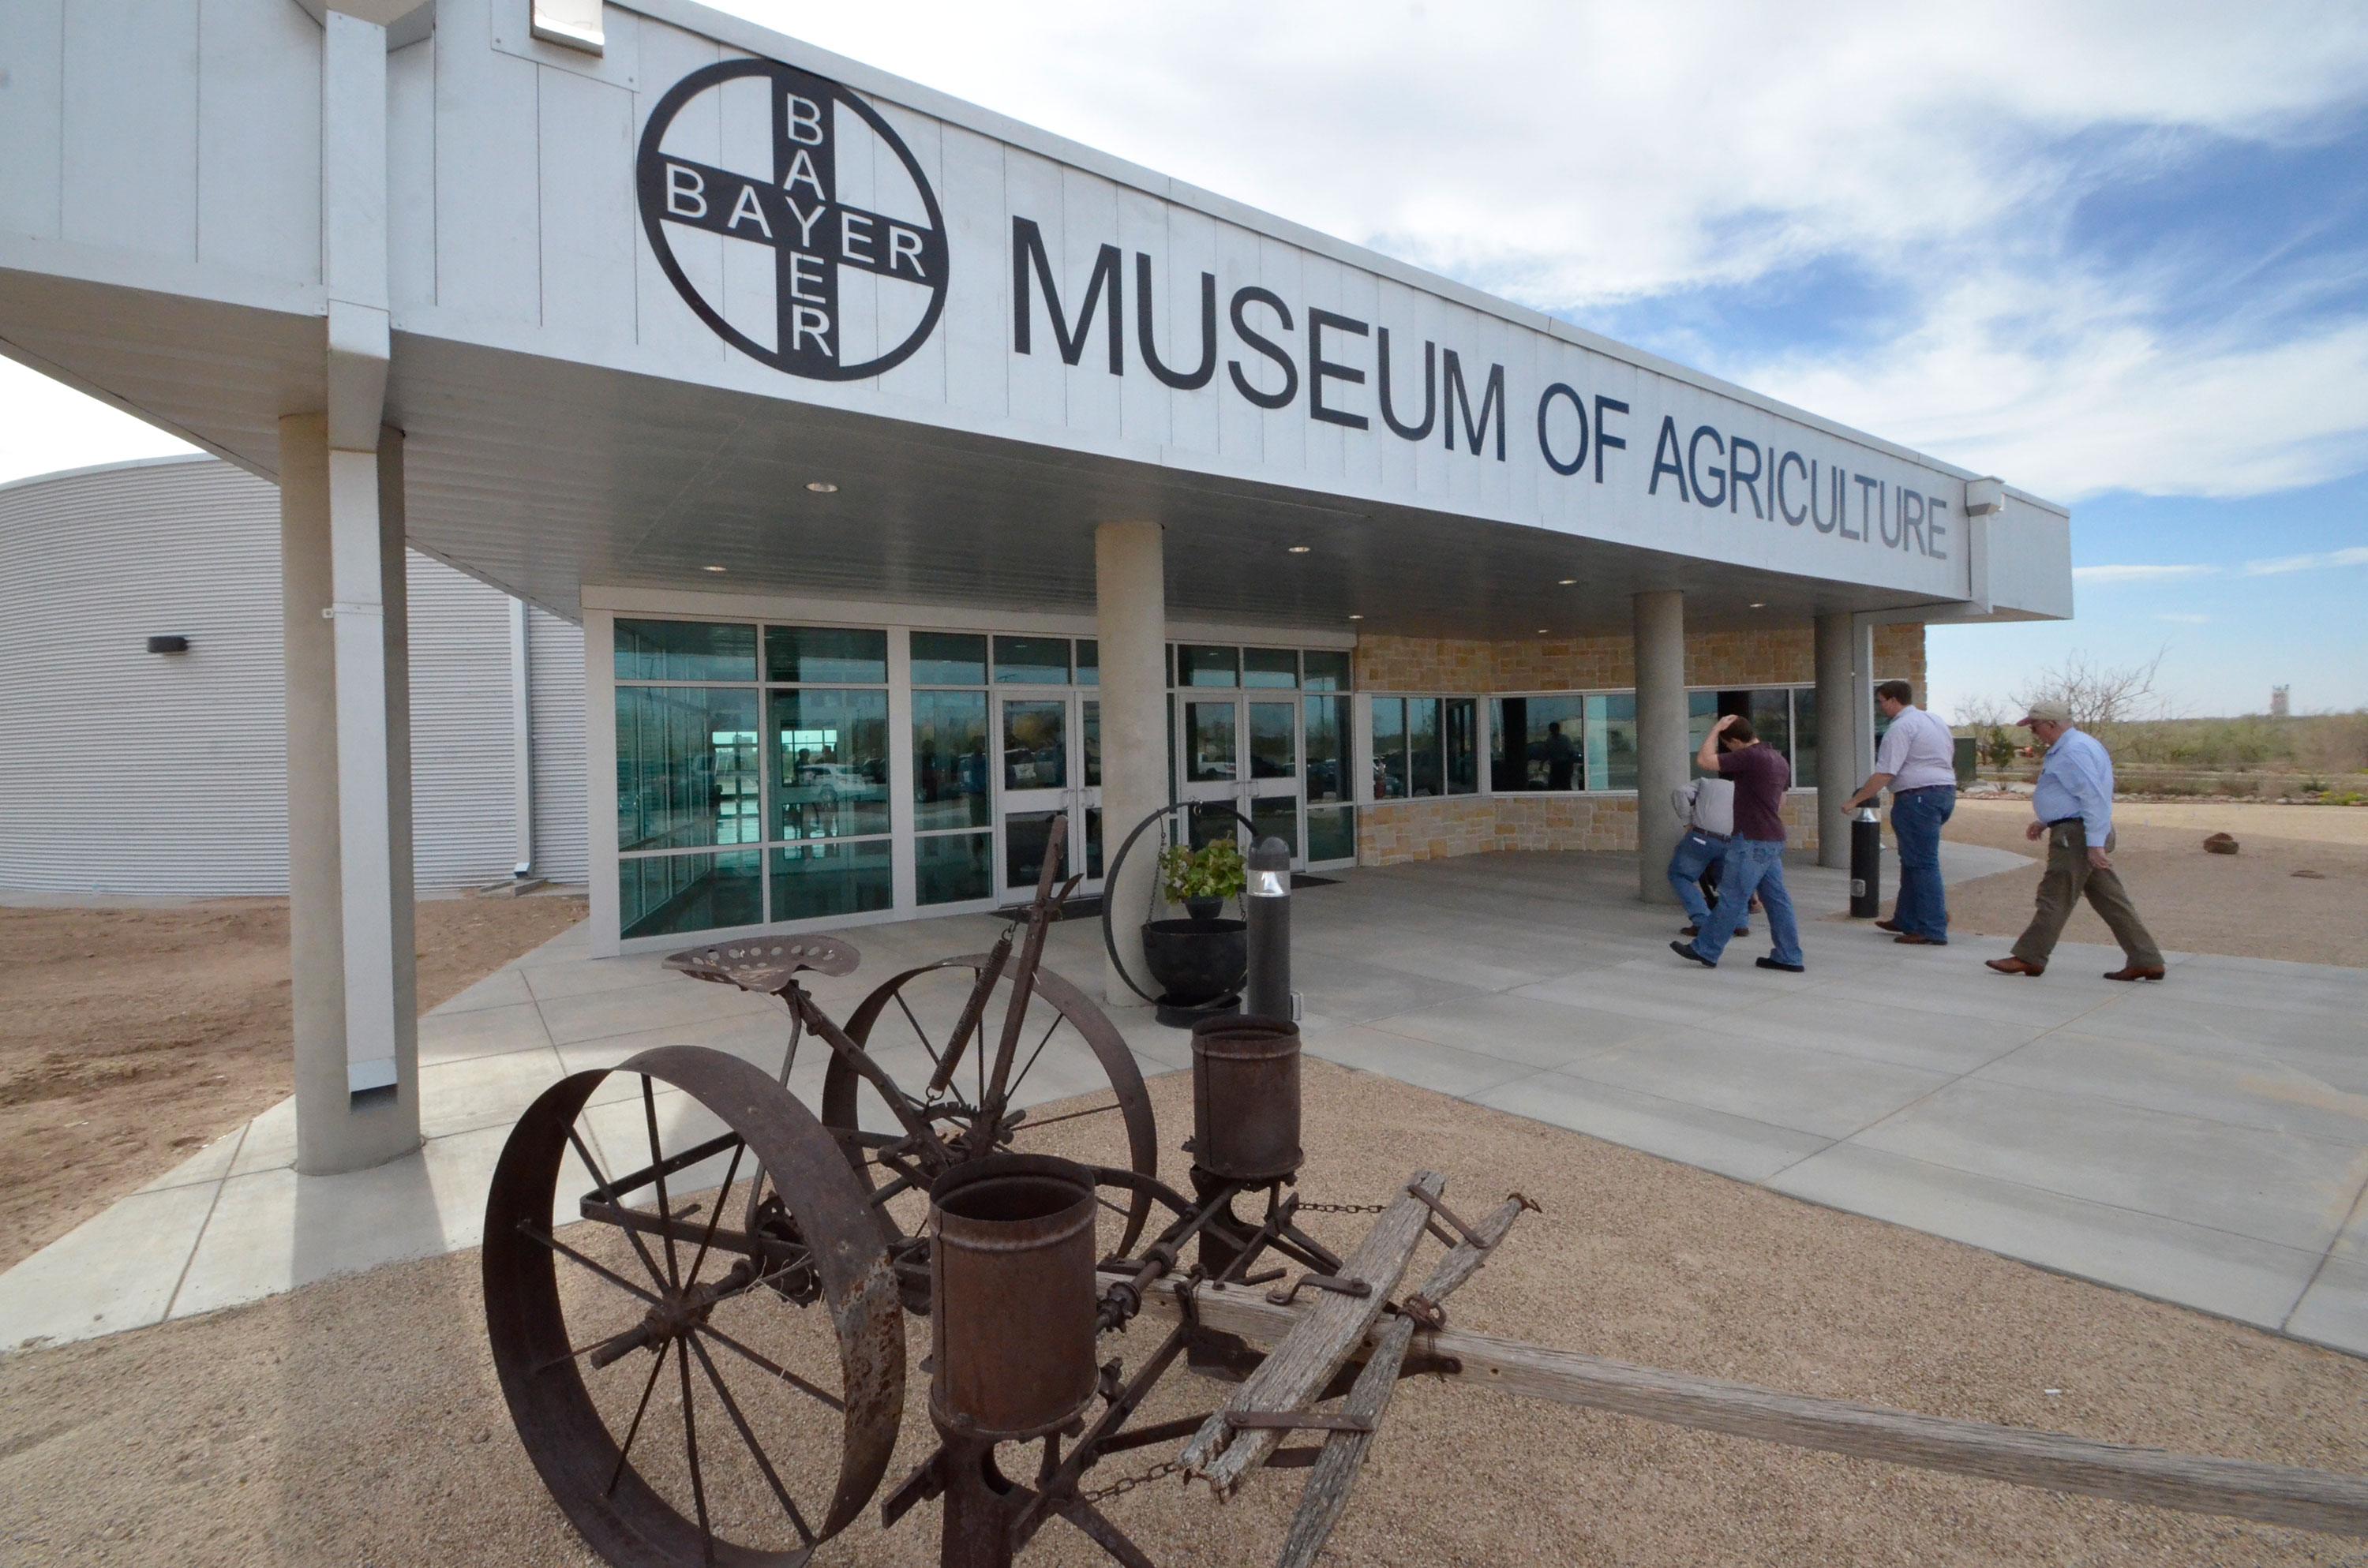 BAYER MUSEUM OF AGRICULTURE - Lubbock Cultural District